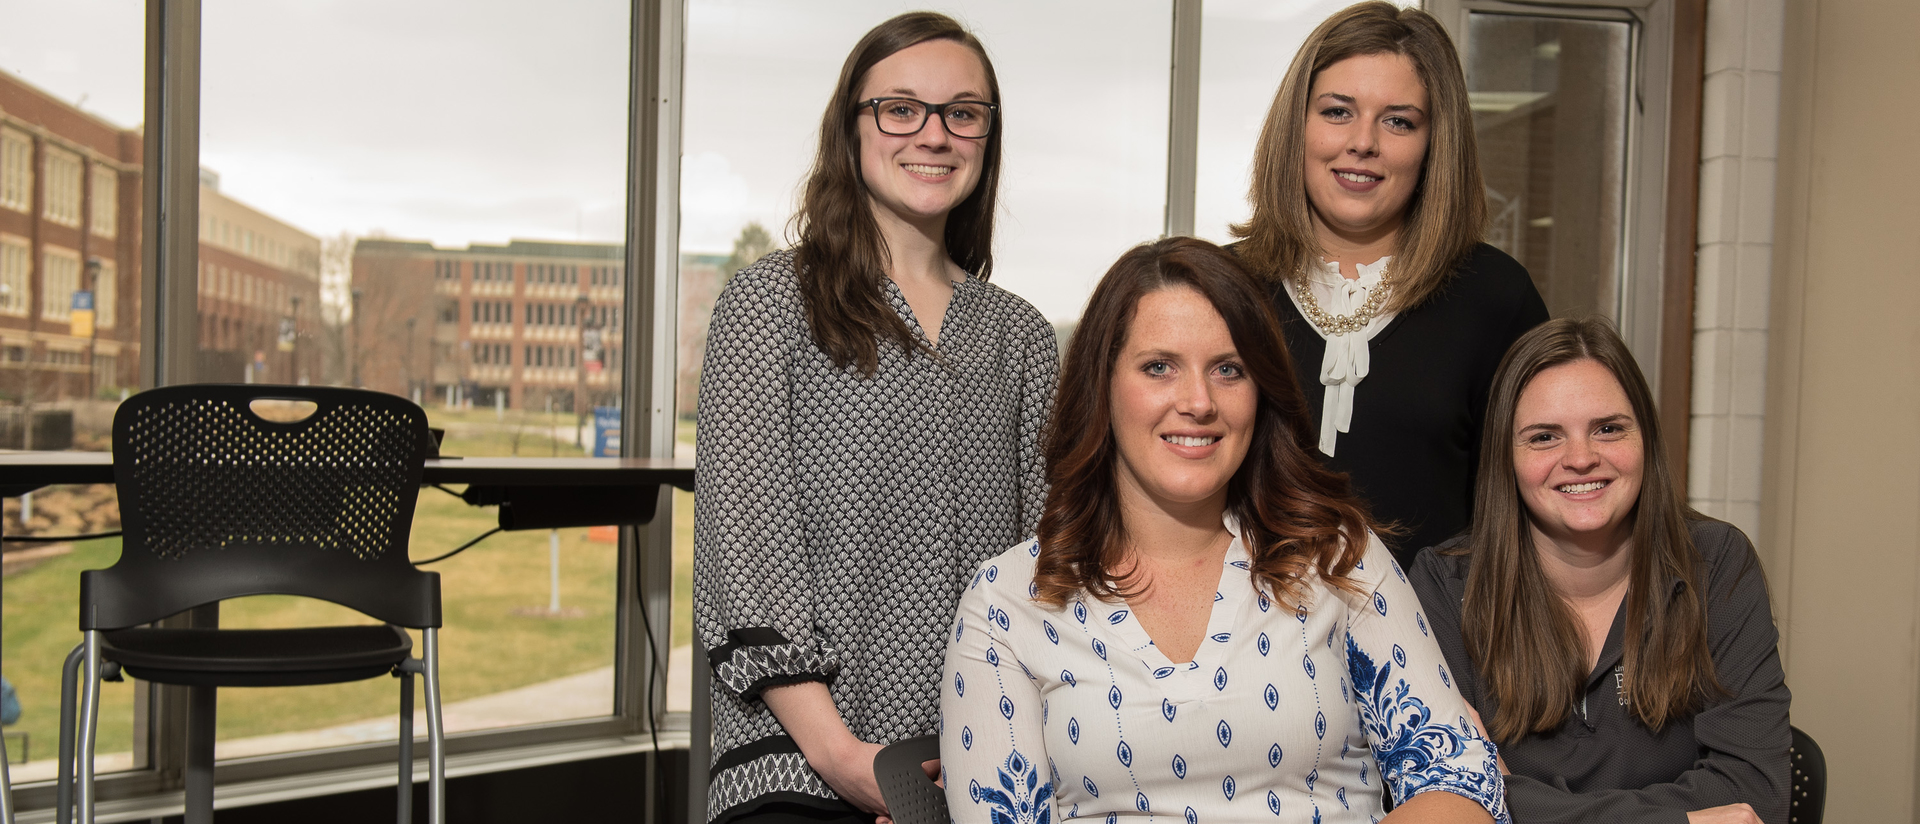 Blugolds (from left) Brittany Martin, Stephanie Little, Stephanie Born and Rachel Martell are among the numerous UW-Eau Claire students who have jobs lined up before graduation.